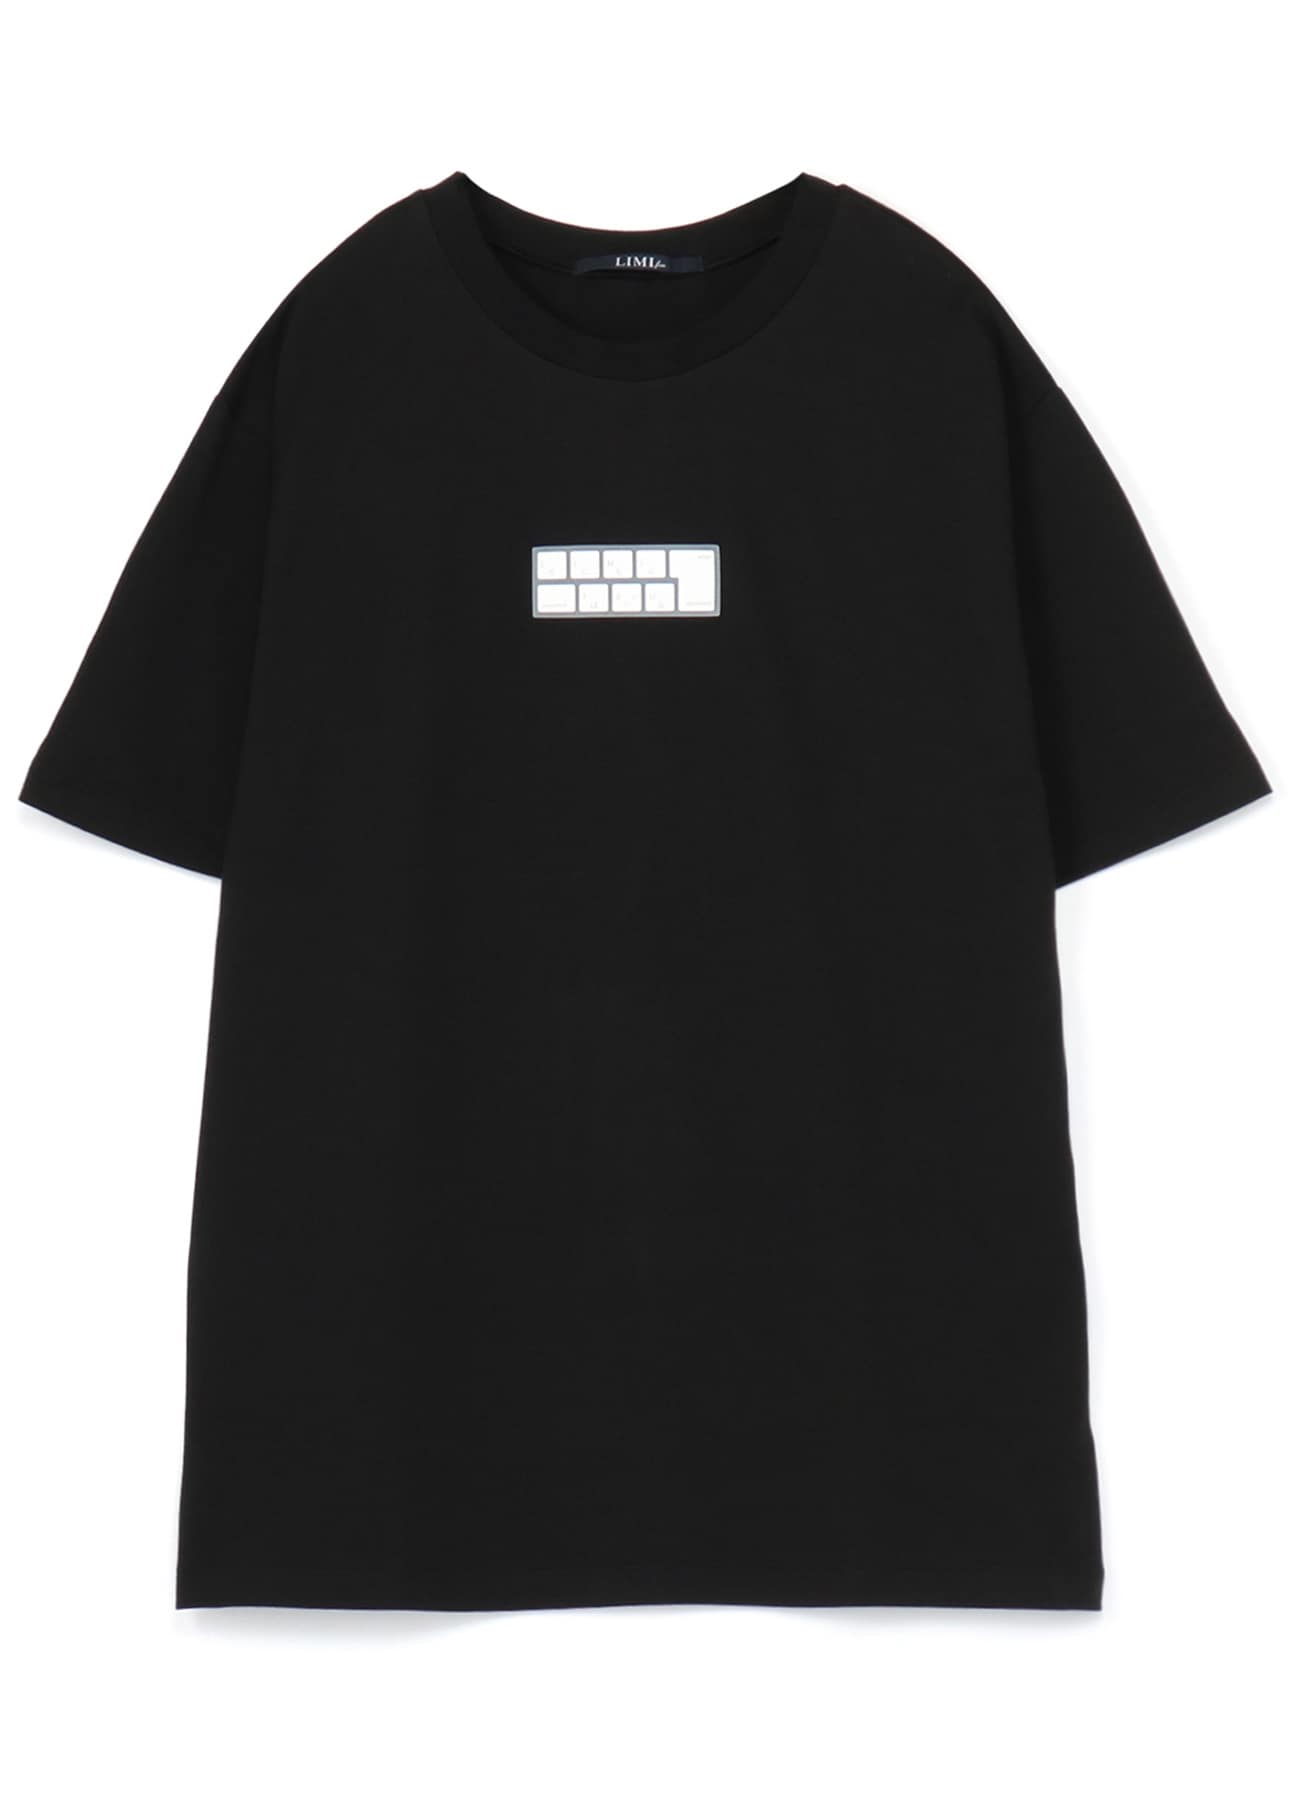 Silicon KeyBoard Oversized T-Shirt(S Black): Vintage 1.1｜THE SHOP 